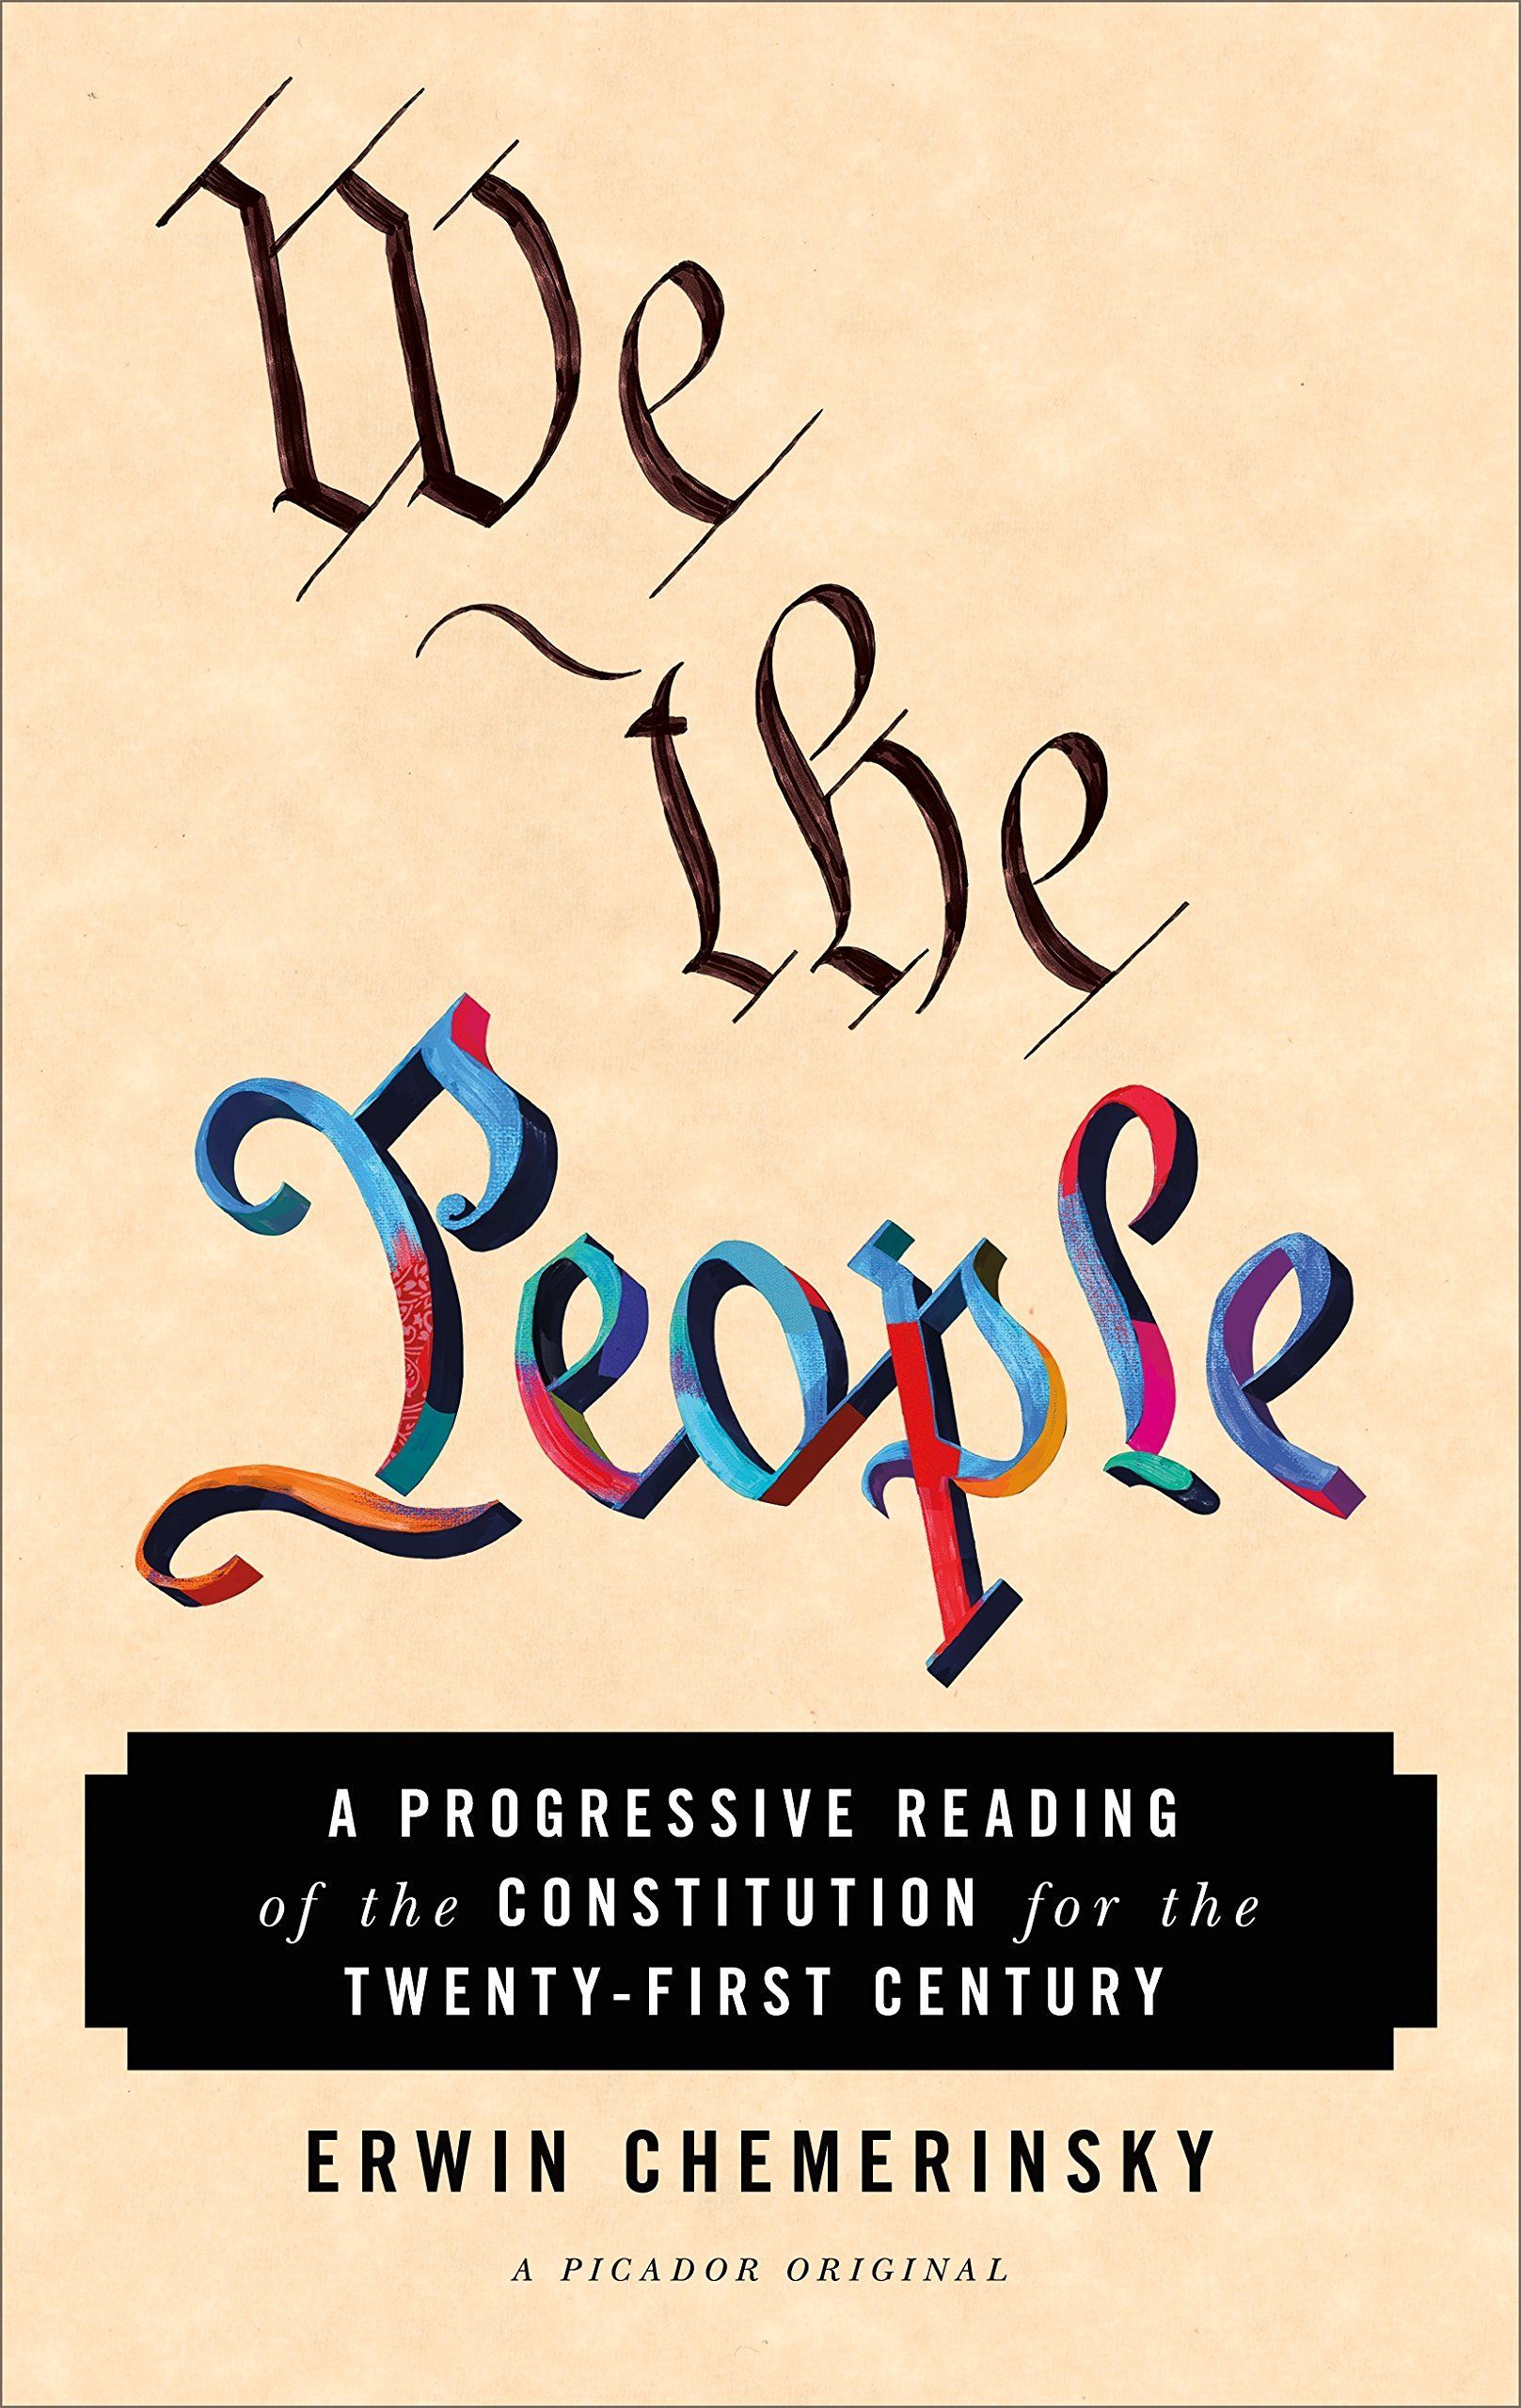 “We the People”: A Guide for the Perplexed Liberal